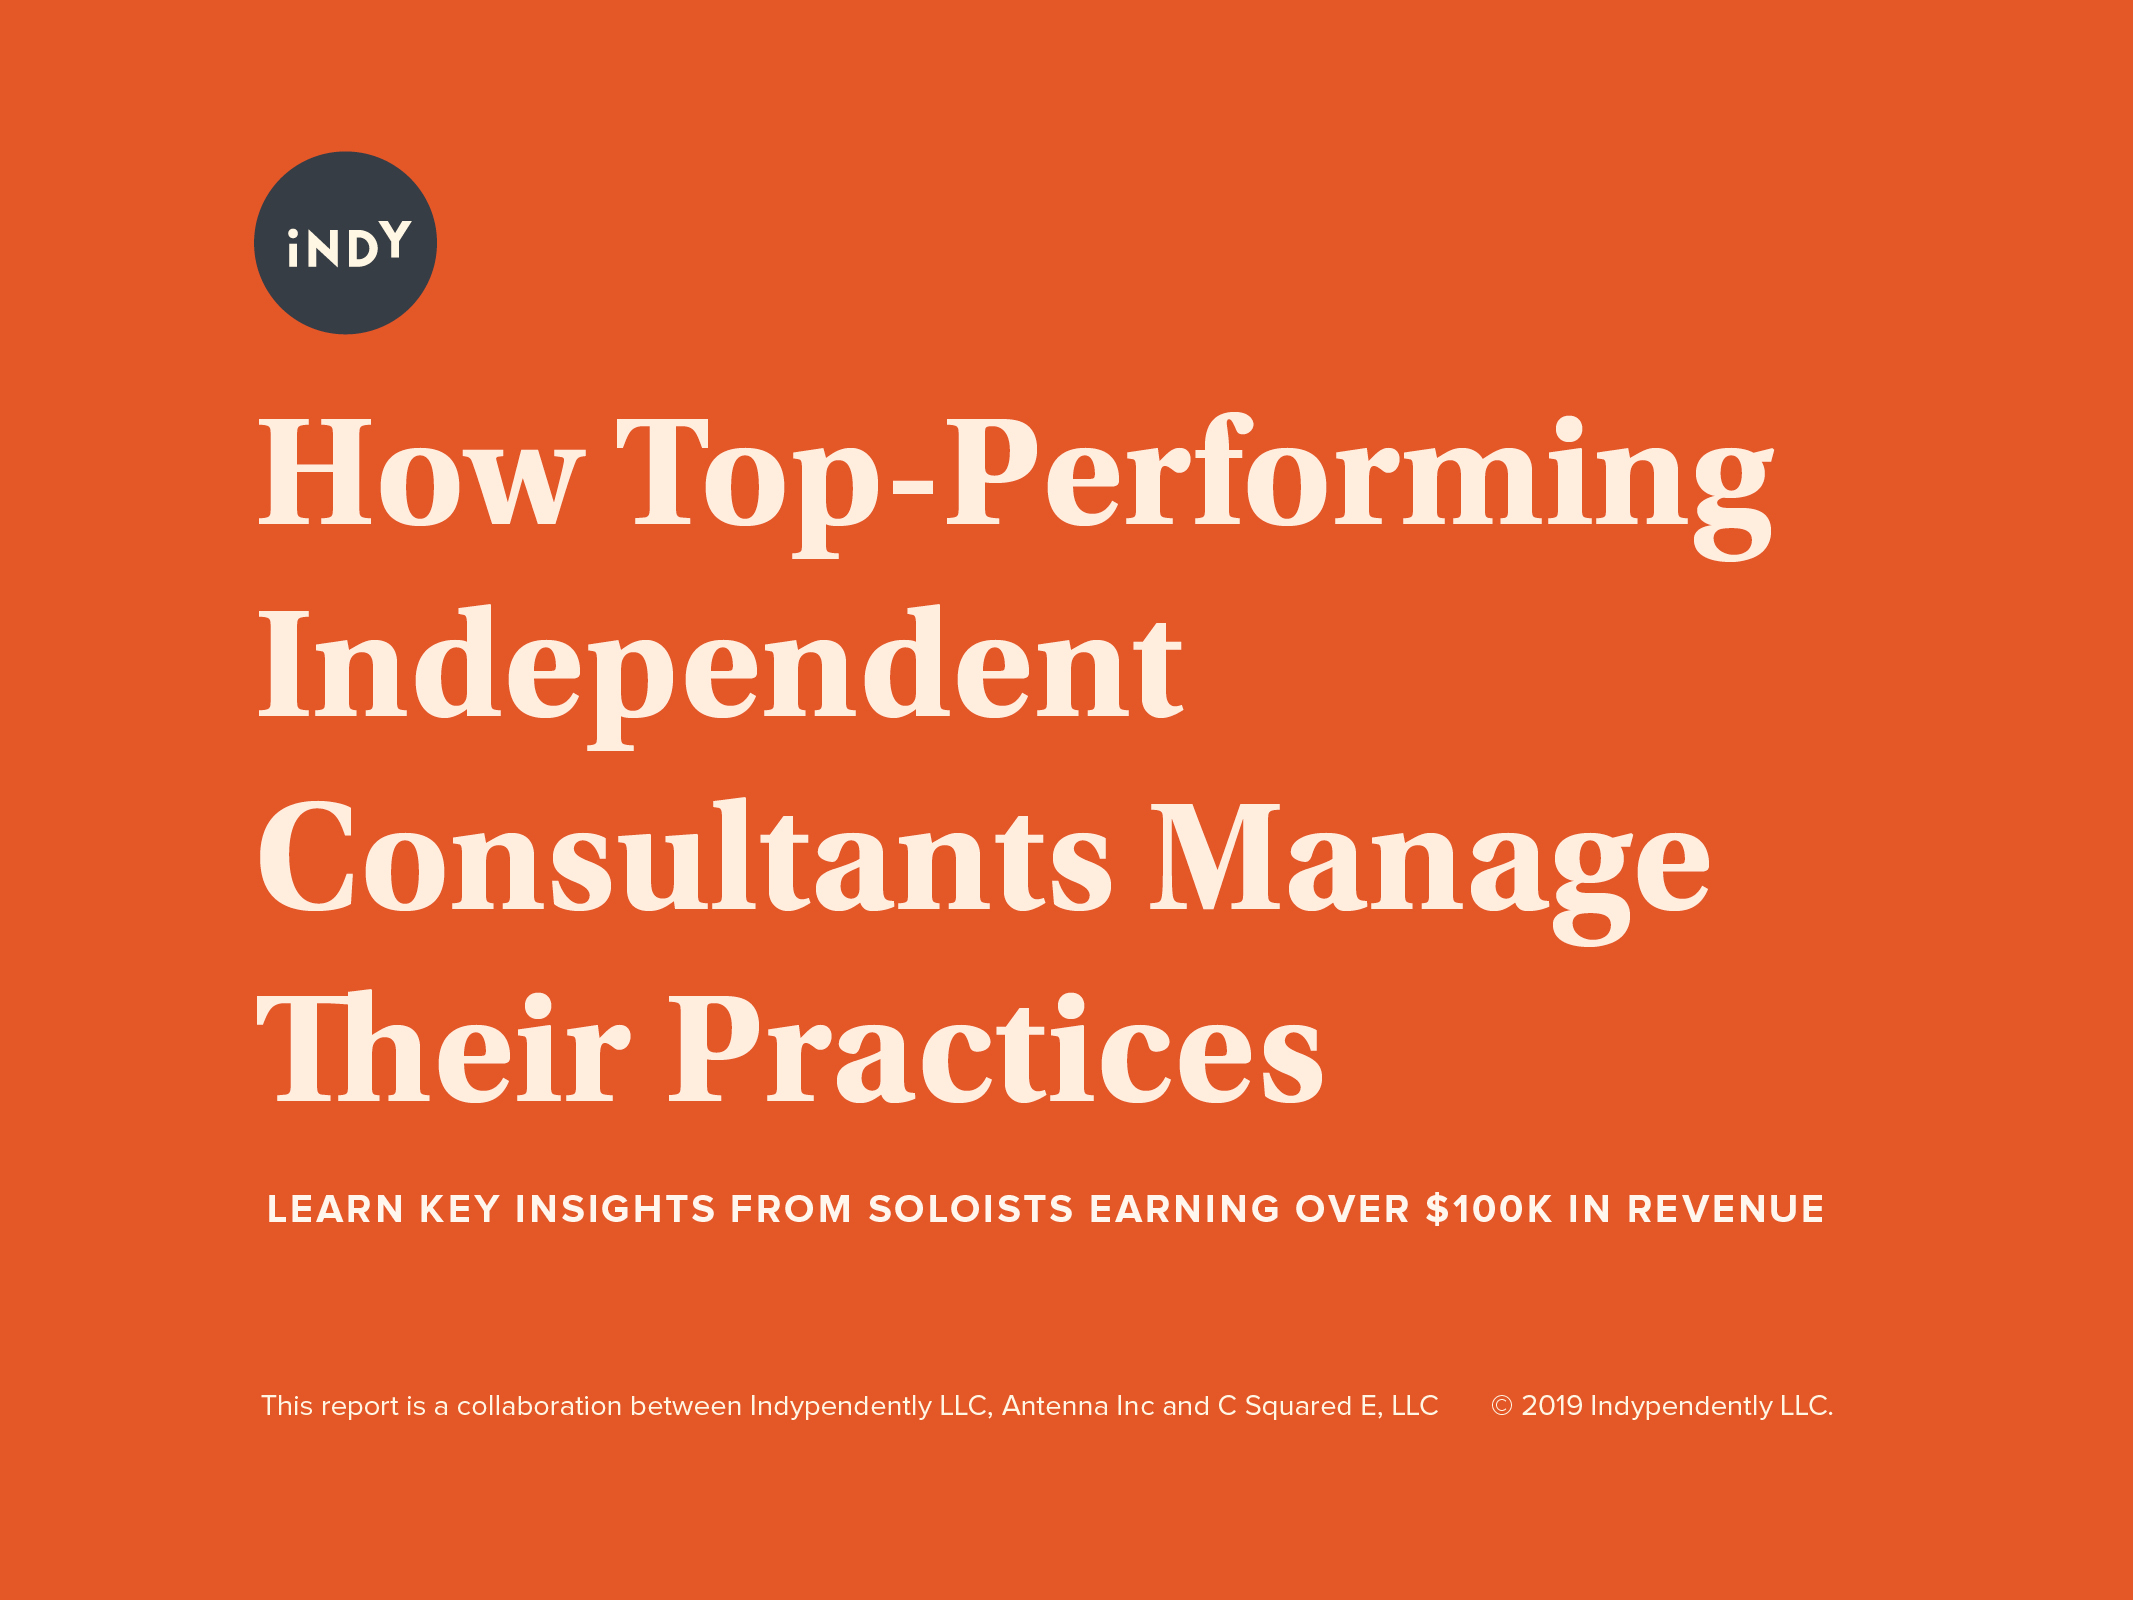 How Top-Performing Independent Consultants Manage Their Practices